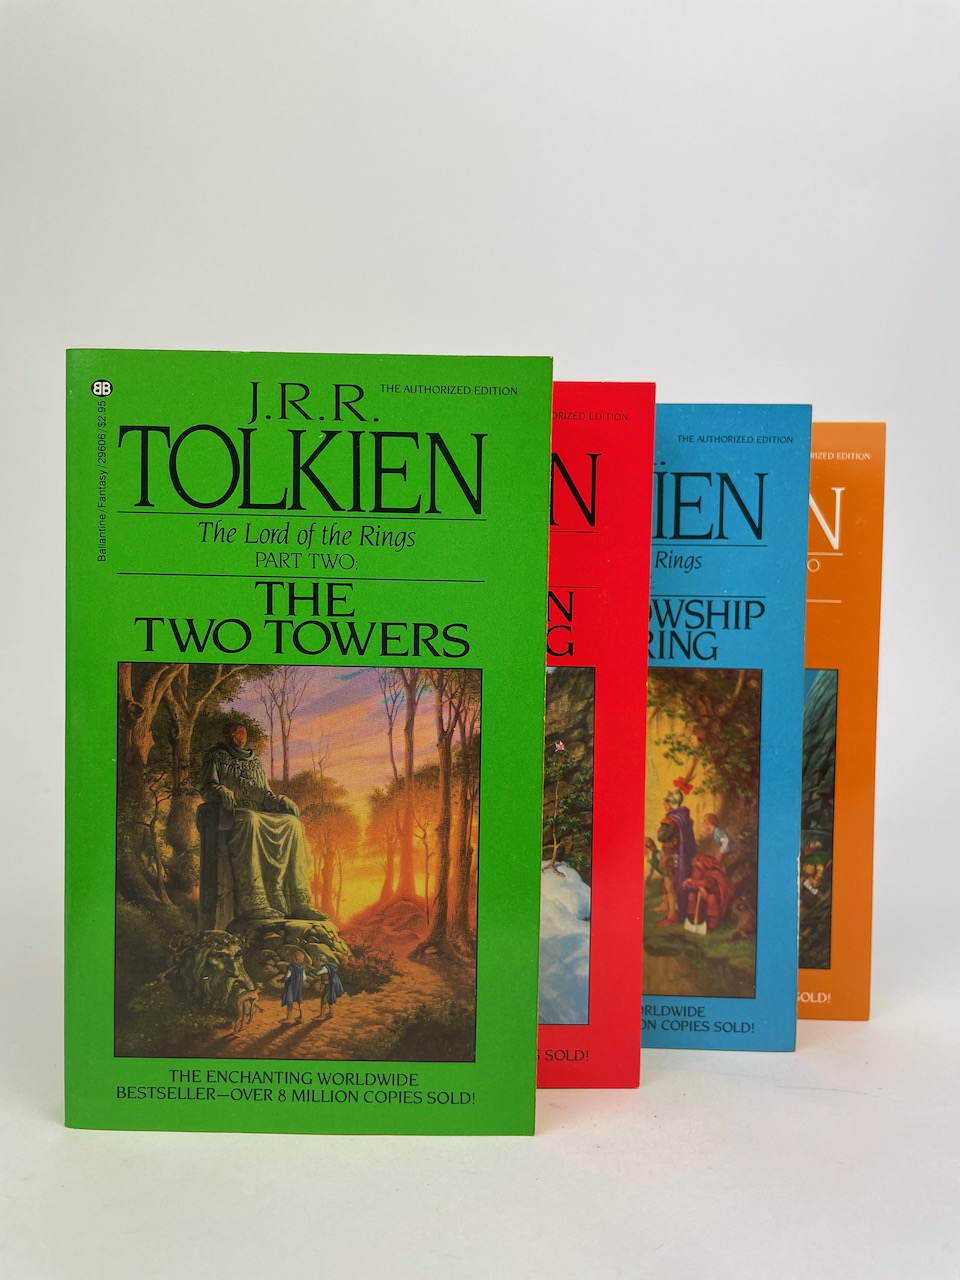 The Lord of the Rings and The Hobbit set from 1984, by Ballantine Books, New York 15